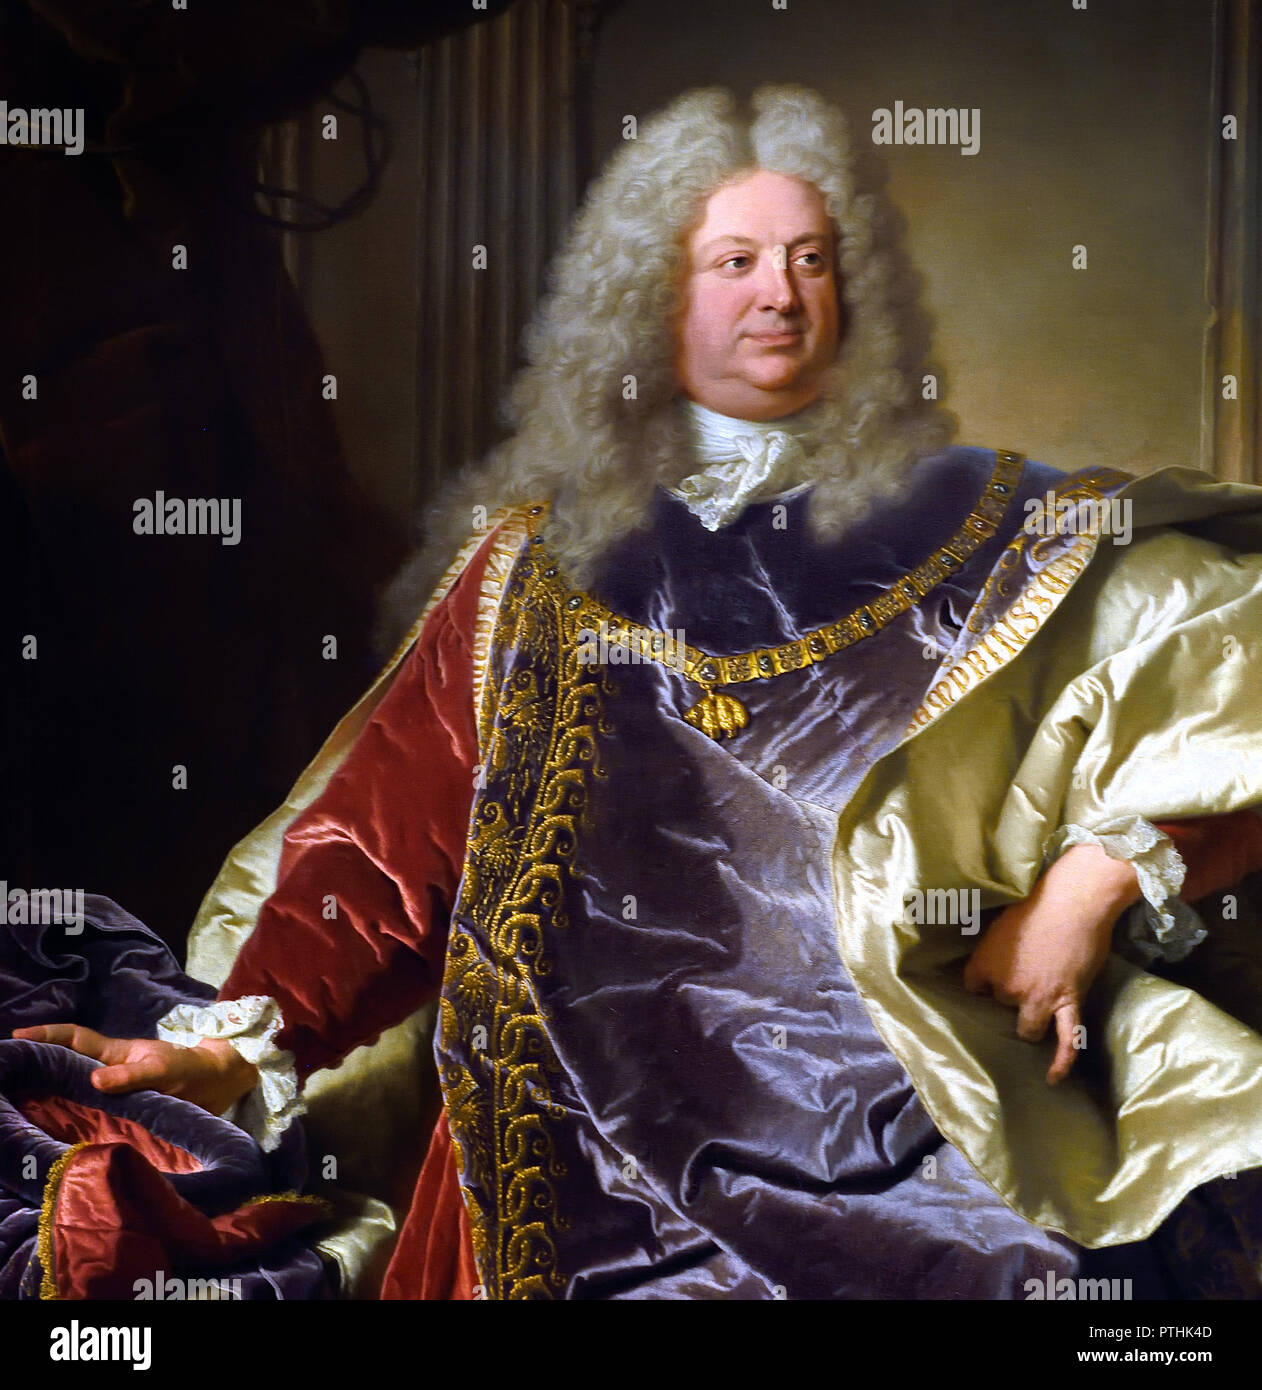 Philipp Ludwig Wenzel Sinzendorf 1671 – 1742 Austrian diplomat and statesman who for nearly four decades served as Court Chancellor responsible of foreign affairs of the Habsburg Monarchy. by painter Hyacinthe Rigaud 1659 - 1743 France French Stock Photo